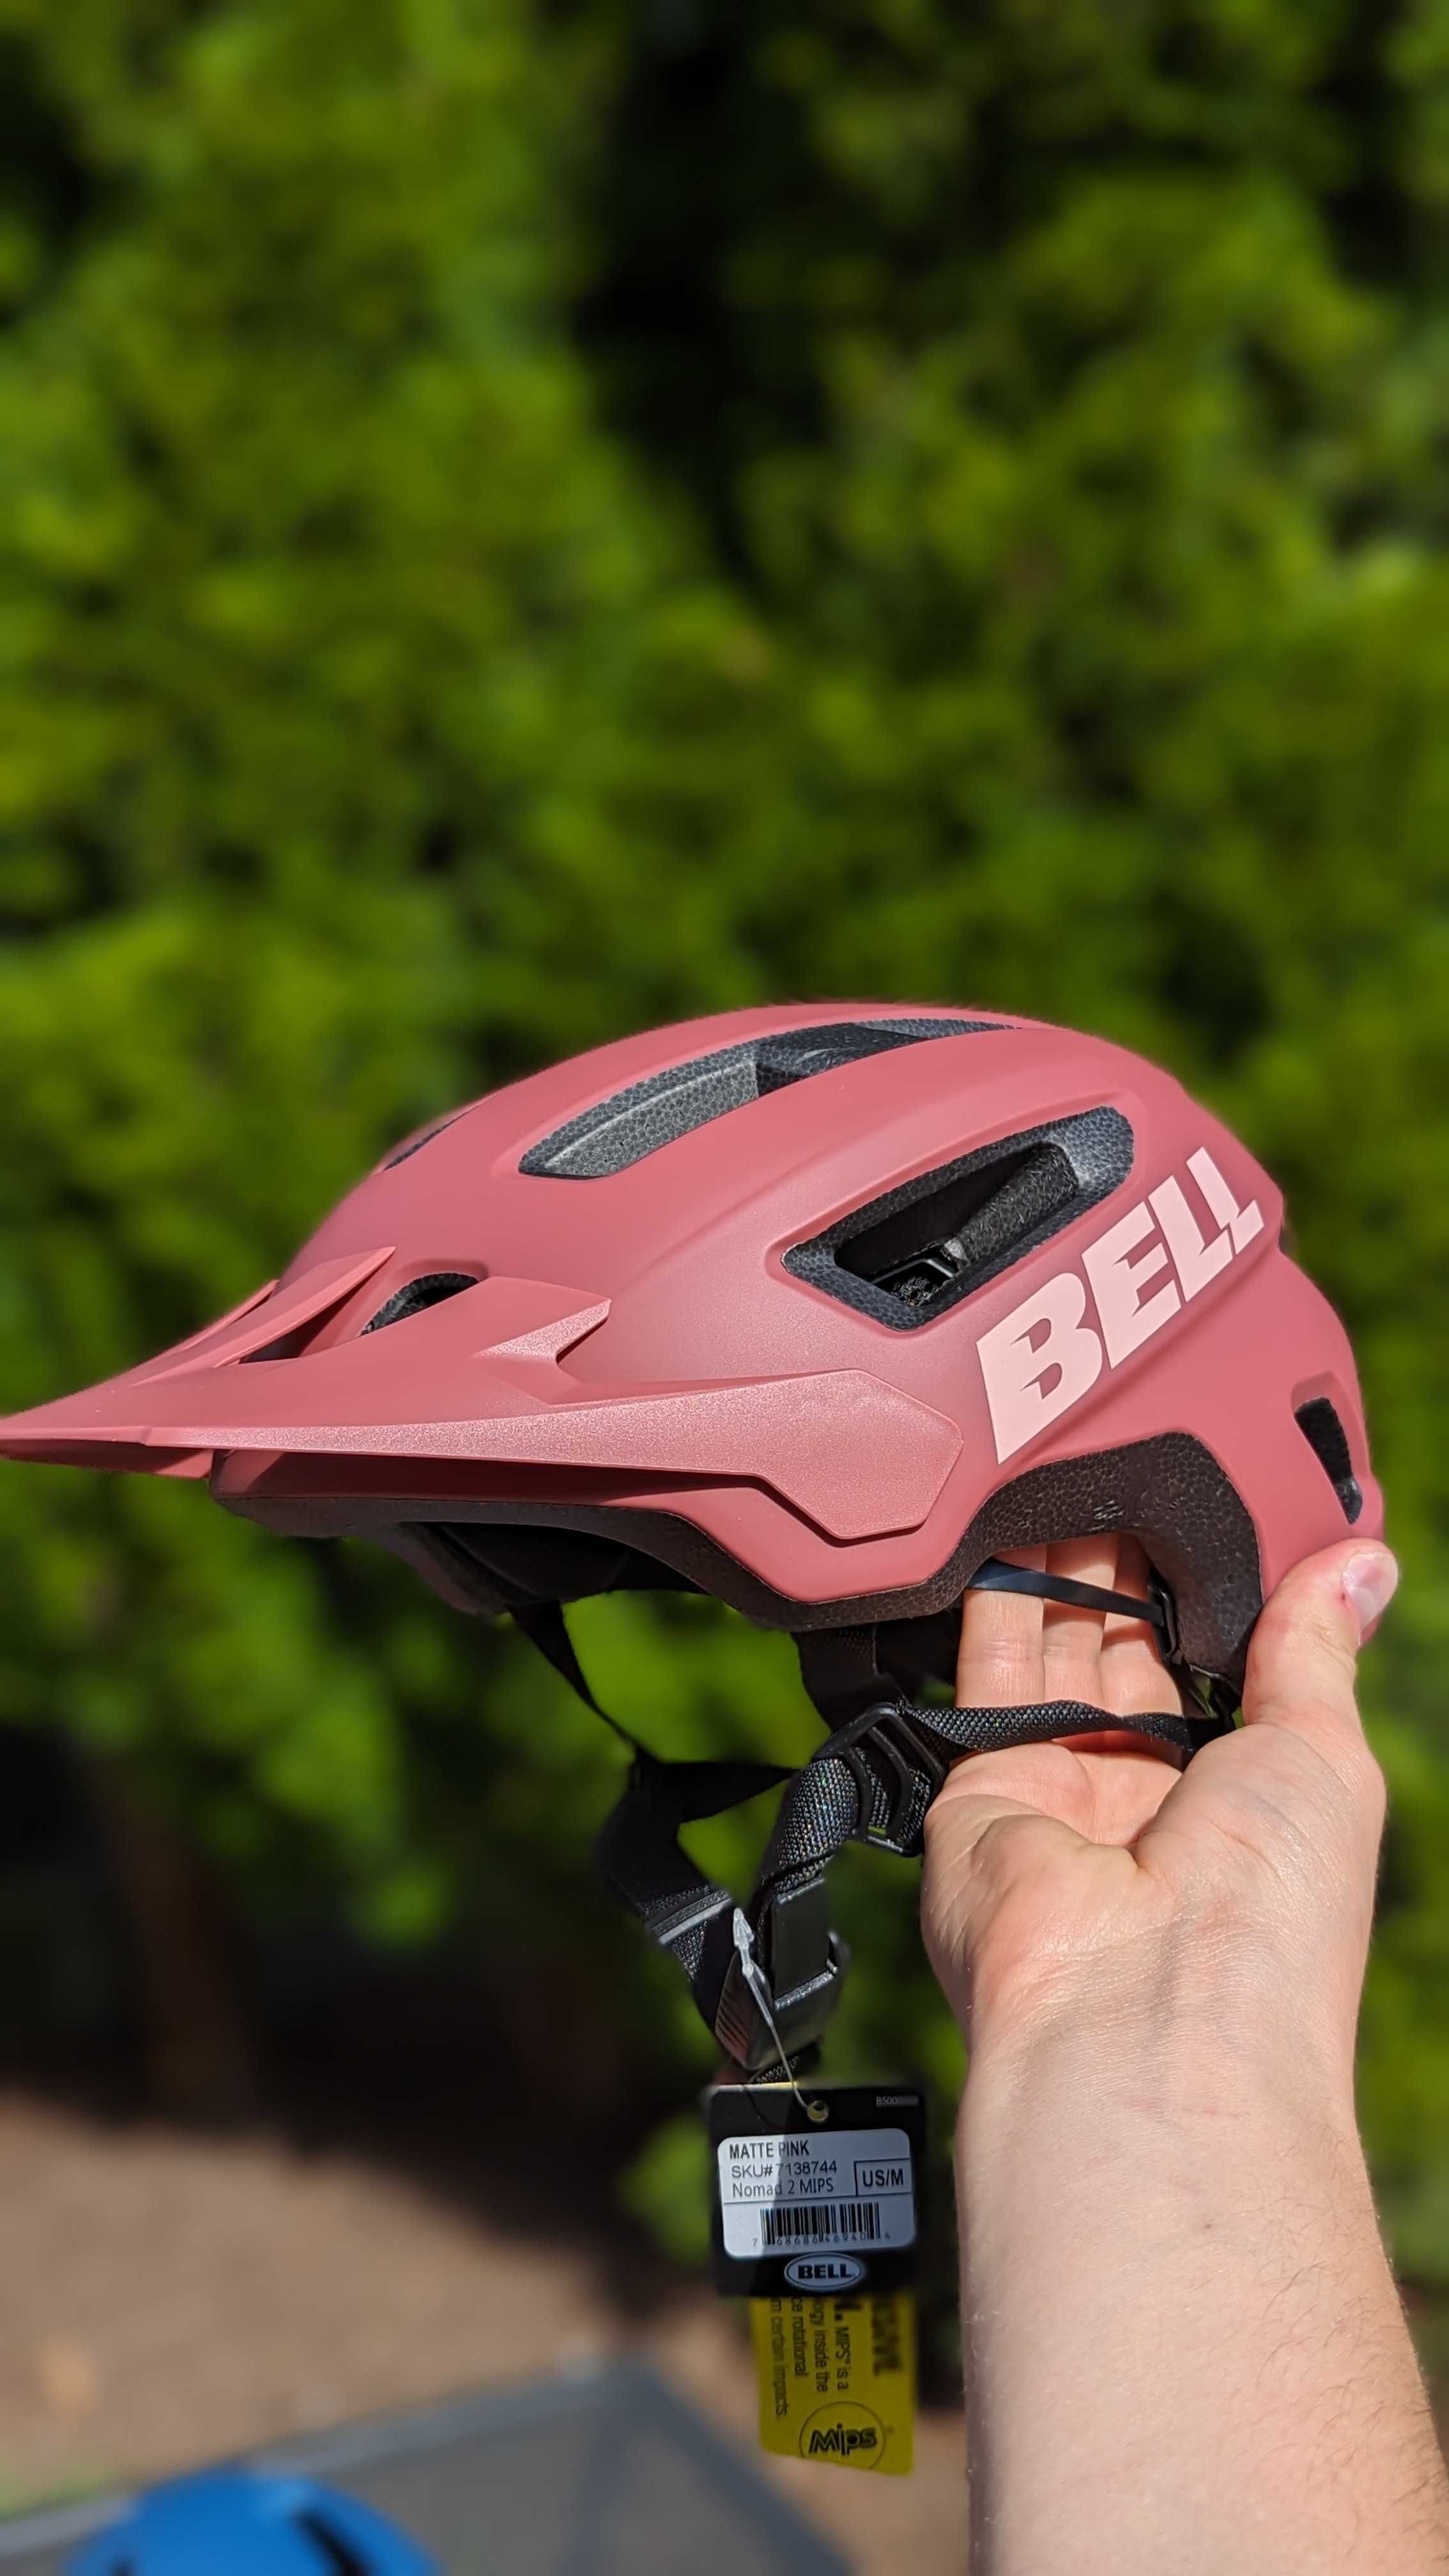 Kask MTB Bell Nomad 2 (r.S/M) Mips